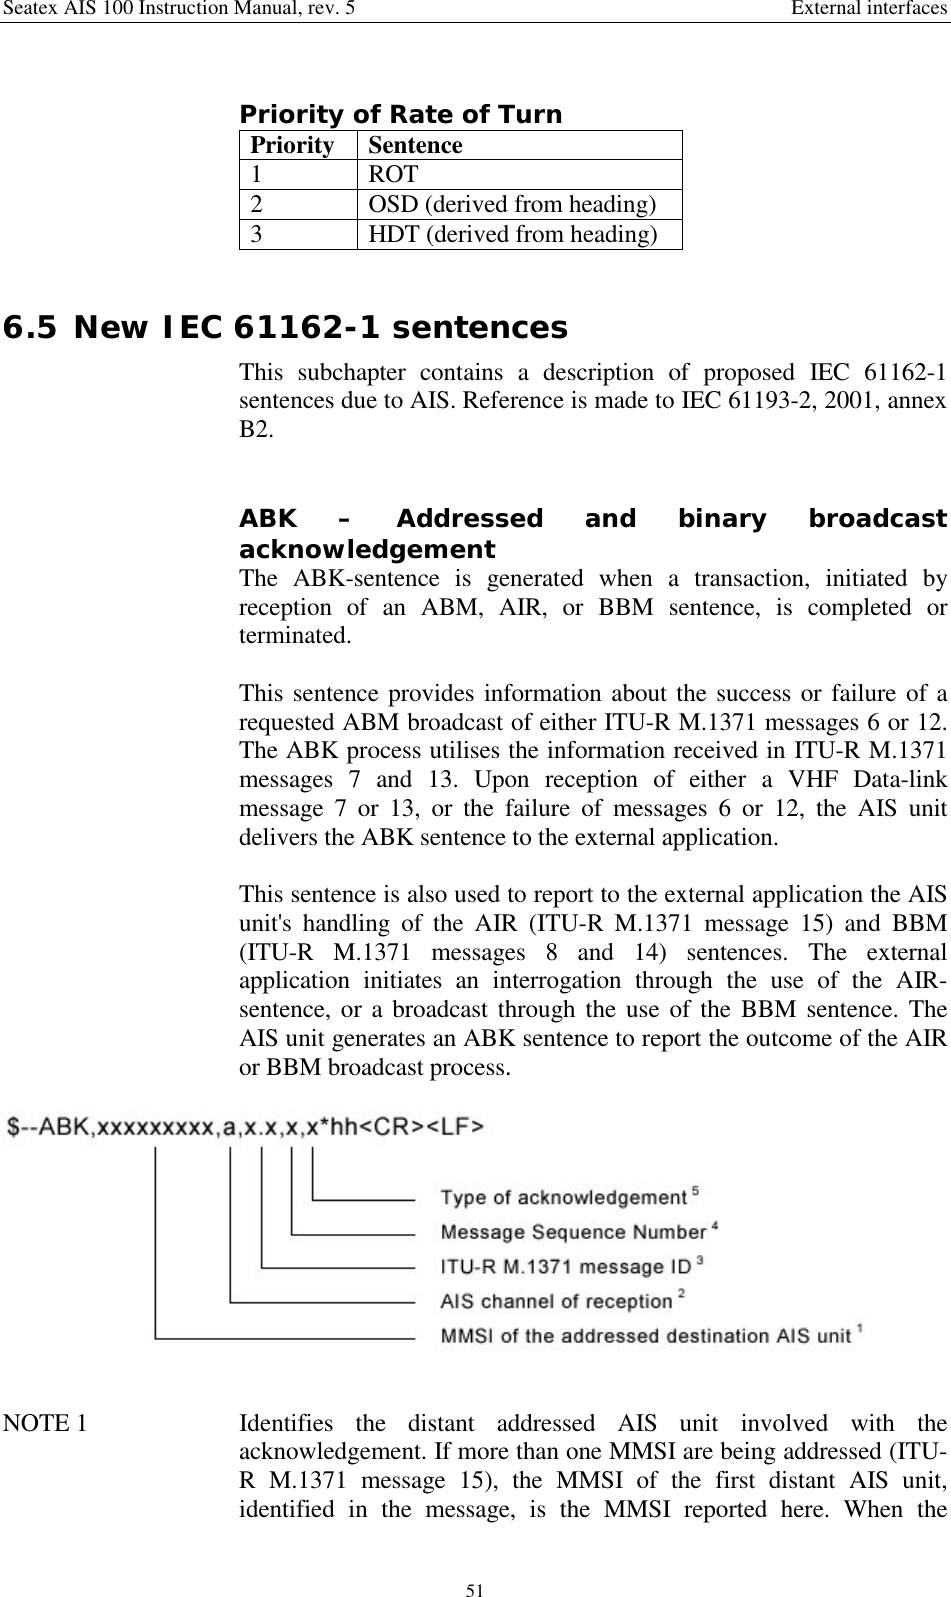 Seatex AIS 100 Instruction Manual, rev. 5 External interfaces51Priority of Rate of TurnPriority Sentence1ROT2 OSD (derived from heading)3 HDT (derived from heading)6.5 New IEC 61162-1 sentencesThis subchapter contains a description of proposed IEC 61162-1sentences due to AIS. Reference is made to IEC 61193-2, 2001, annexB2.ABK – Addressed and binary broadcastacknowledgementThe ABK-sentence is generated when a transaction, initiated byreception of an ABM, AIR, or BBM sentence, is completed orterminated.This sentence provides information about the success or failure of arequested ABM broadcast of either ITU-R M.1371 messages 6 or 12.The ABK process utilises the information received in ITU-R M.1371messages 7 and 13. Upon reception of either a VHF Data-linkmessage 7 or 13, or the failure of messages 6 or 12, the AIS unitdelivers the ABK sentence to the external application.This sentence is also used to report to the external application the AISunit&apos;s handling of the AIR (ITU-R M.1371 message 15) and BBM(ITU-R M.1371 messages 8 and 14) sentences. The externalapplication initiates an interrogation through the use of the AIR-sentence, or a broadcast through the use of the BBM sentence. TheAIS unit generates an ABK sentence to report the outcome of the AIRor BBM broadcast process.NOTE 1  Identifies the distant addressed AIS unit involved with theacknowledgement. If more than one MMSI are being addressed (ITU-R M.1371 message 15), the MMSI of the first distant AIS unit,identified in the message, is the MMSI reported here. When the